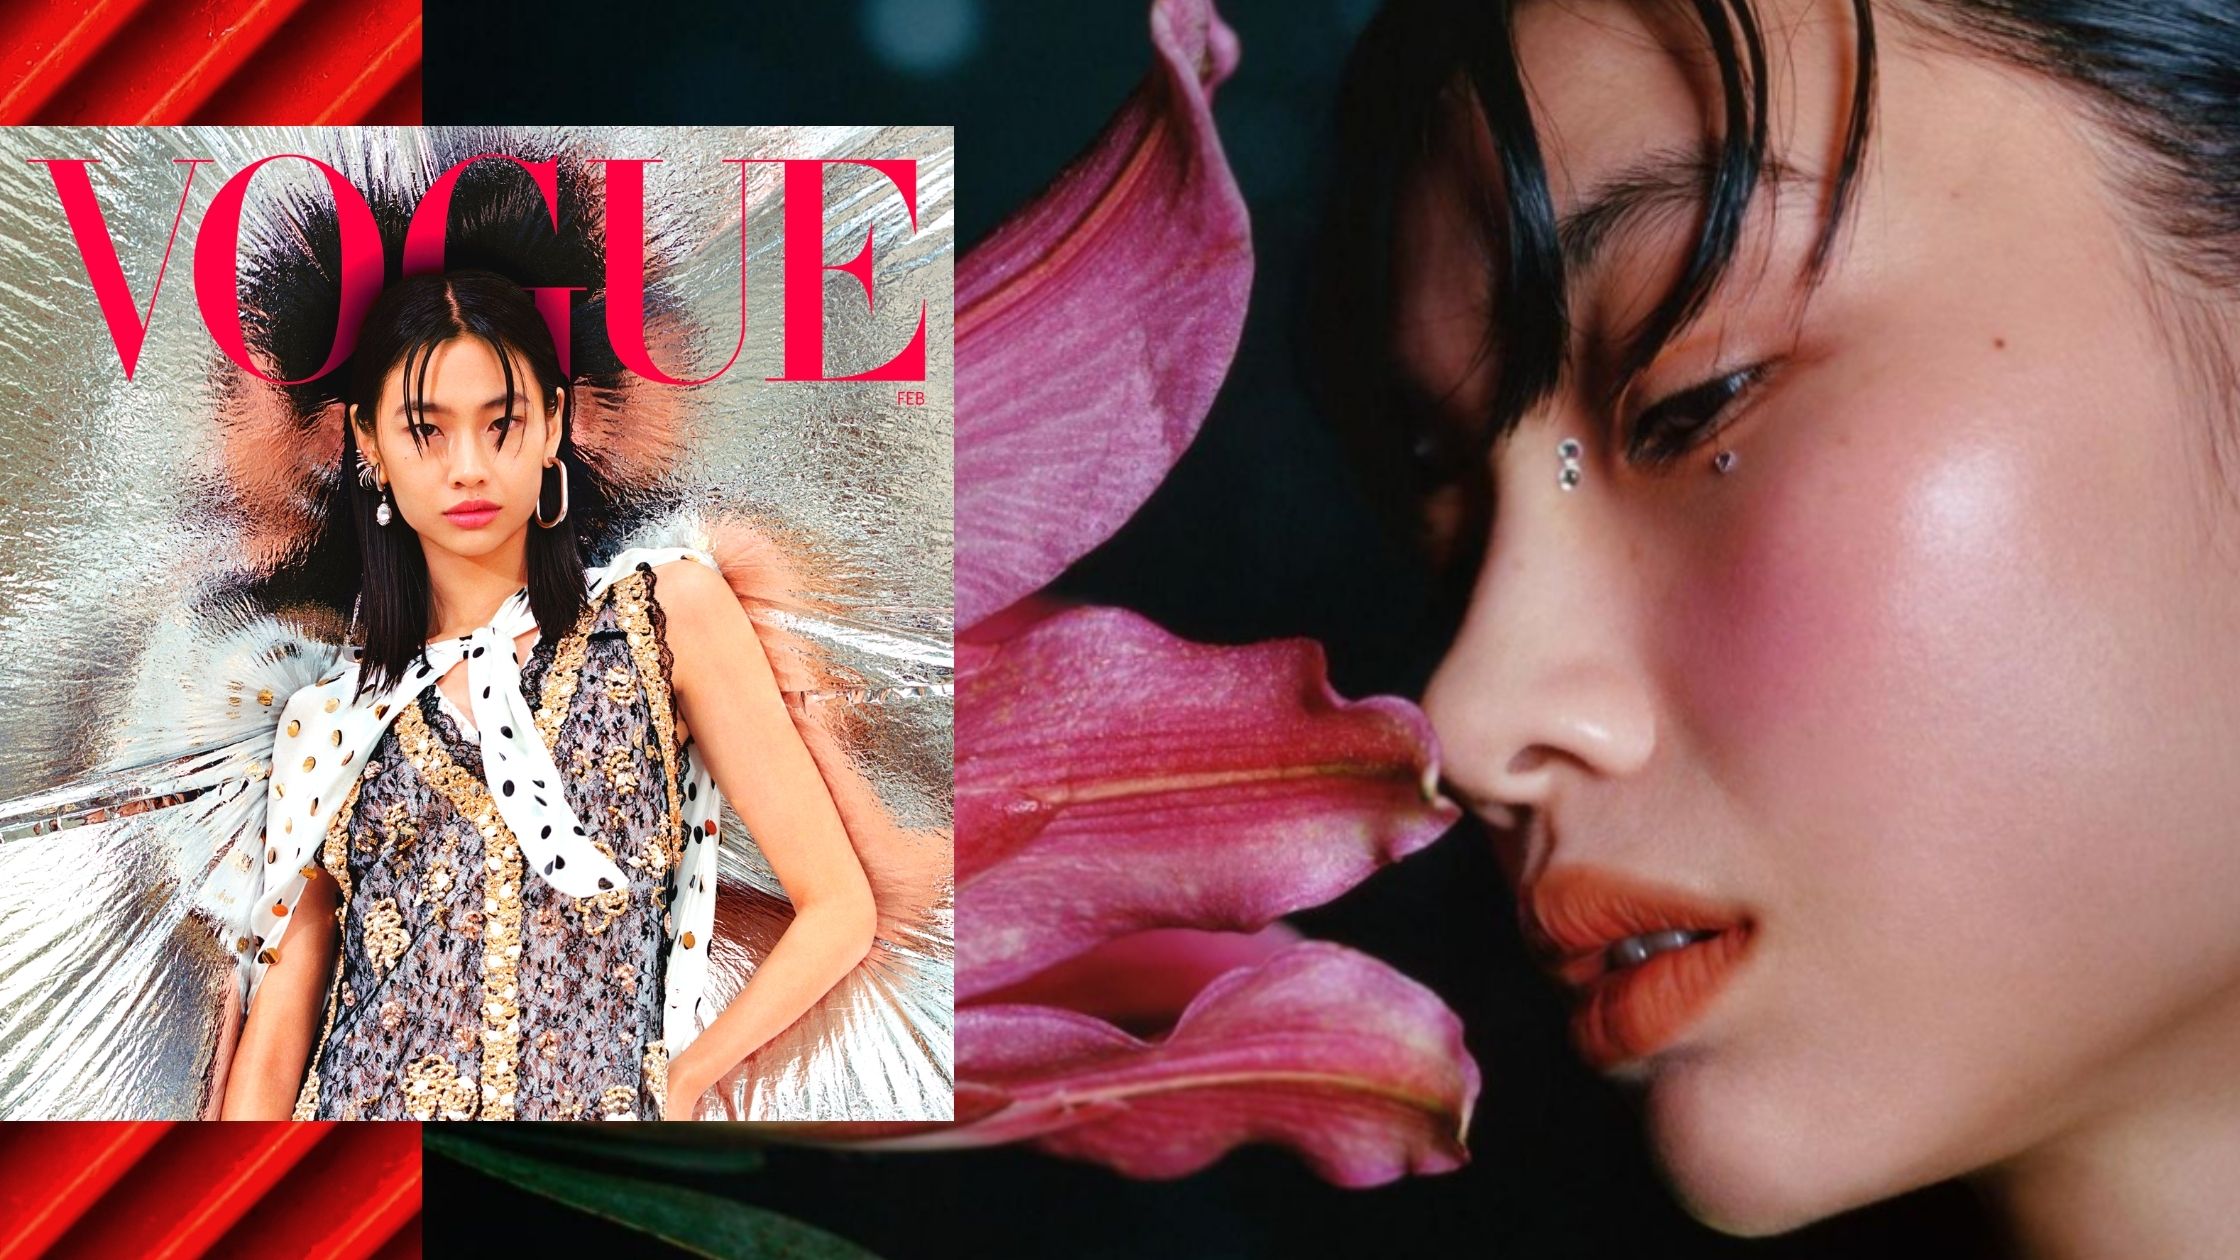 Squid Game' actor Jung Ho Yeon is the first Asian solo cover model for  Vogue